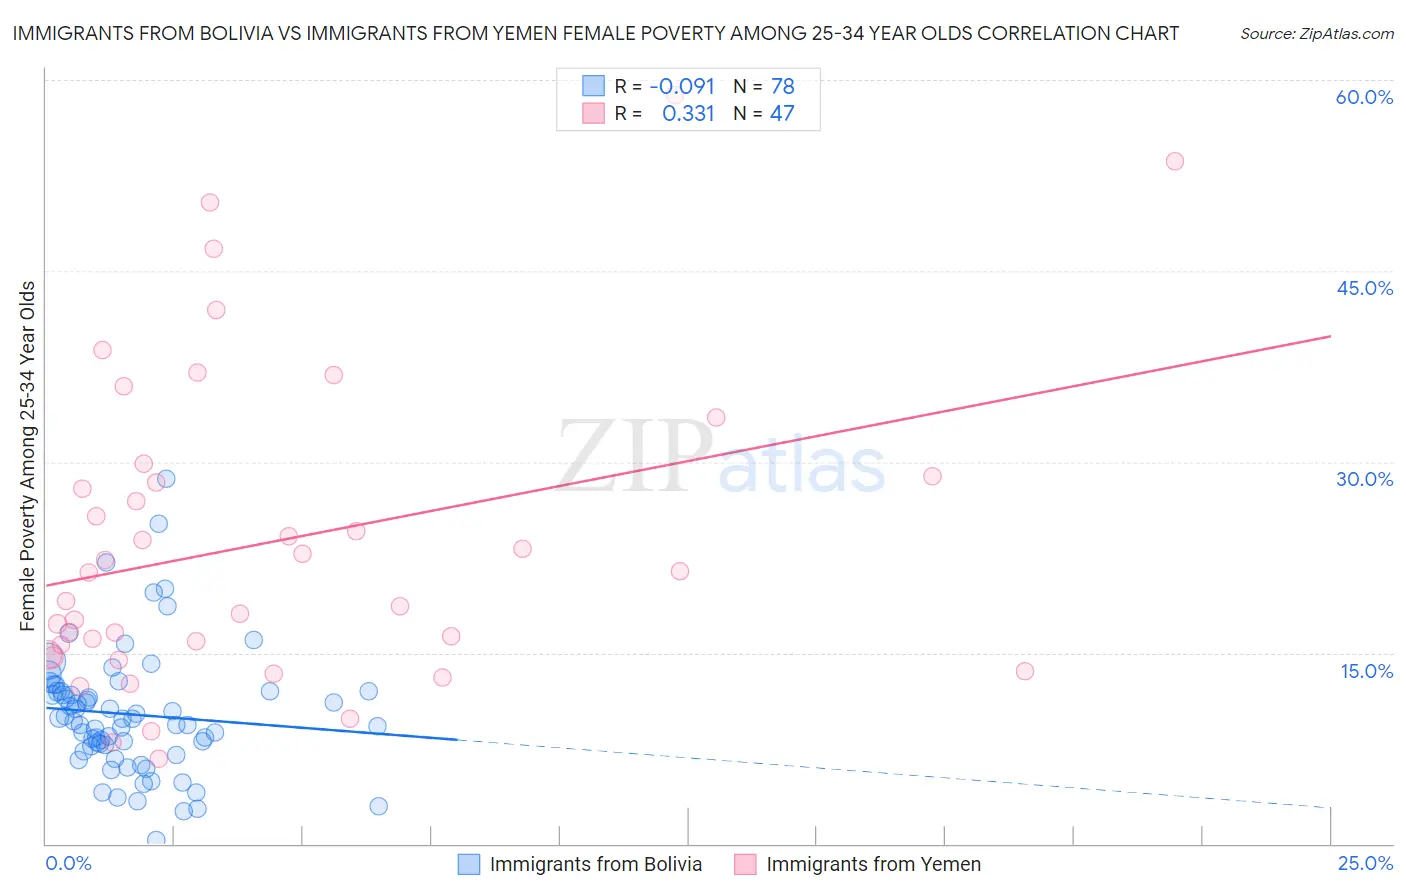 Immigrants from Bolivia vs Immigrants from Yemen Female Poverty Among 25-34 Year Olds